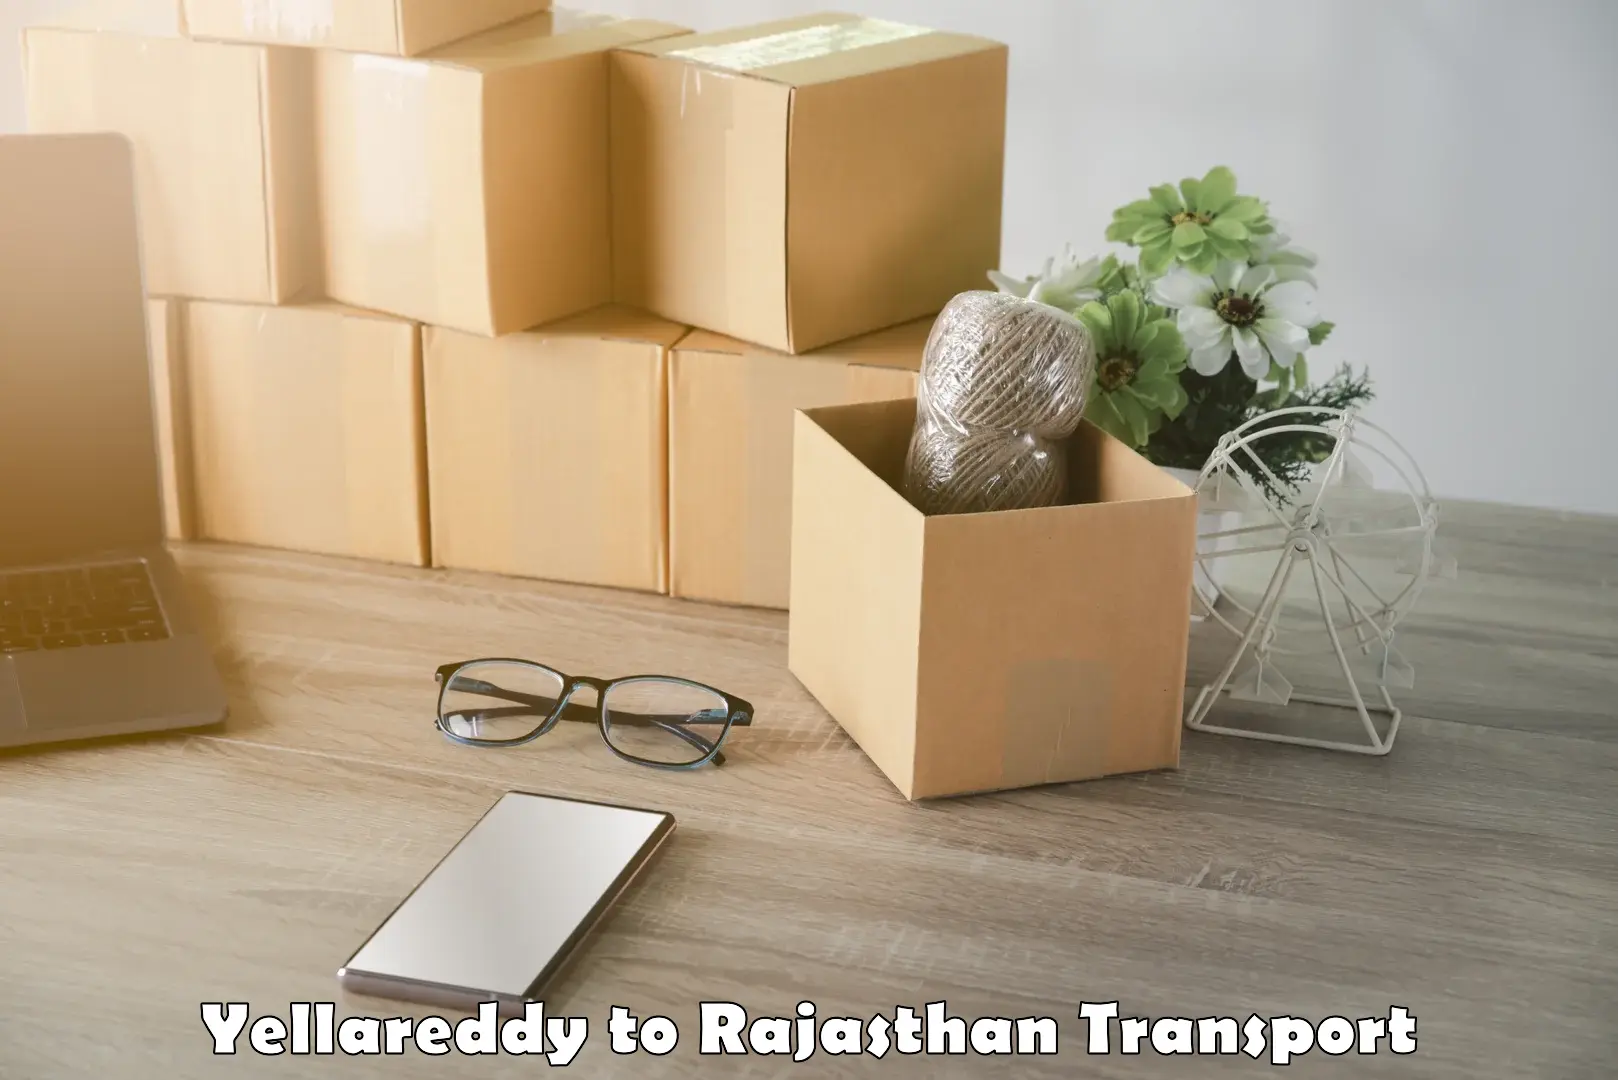 Vehicle transport services in Yellareddy to Asind